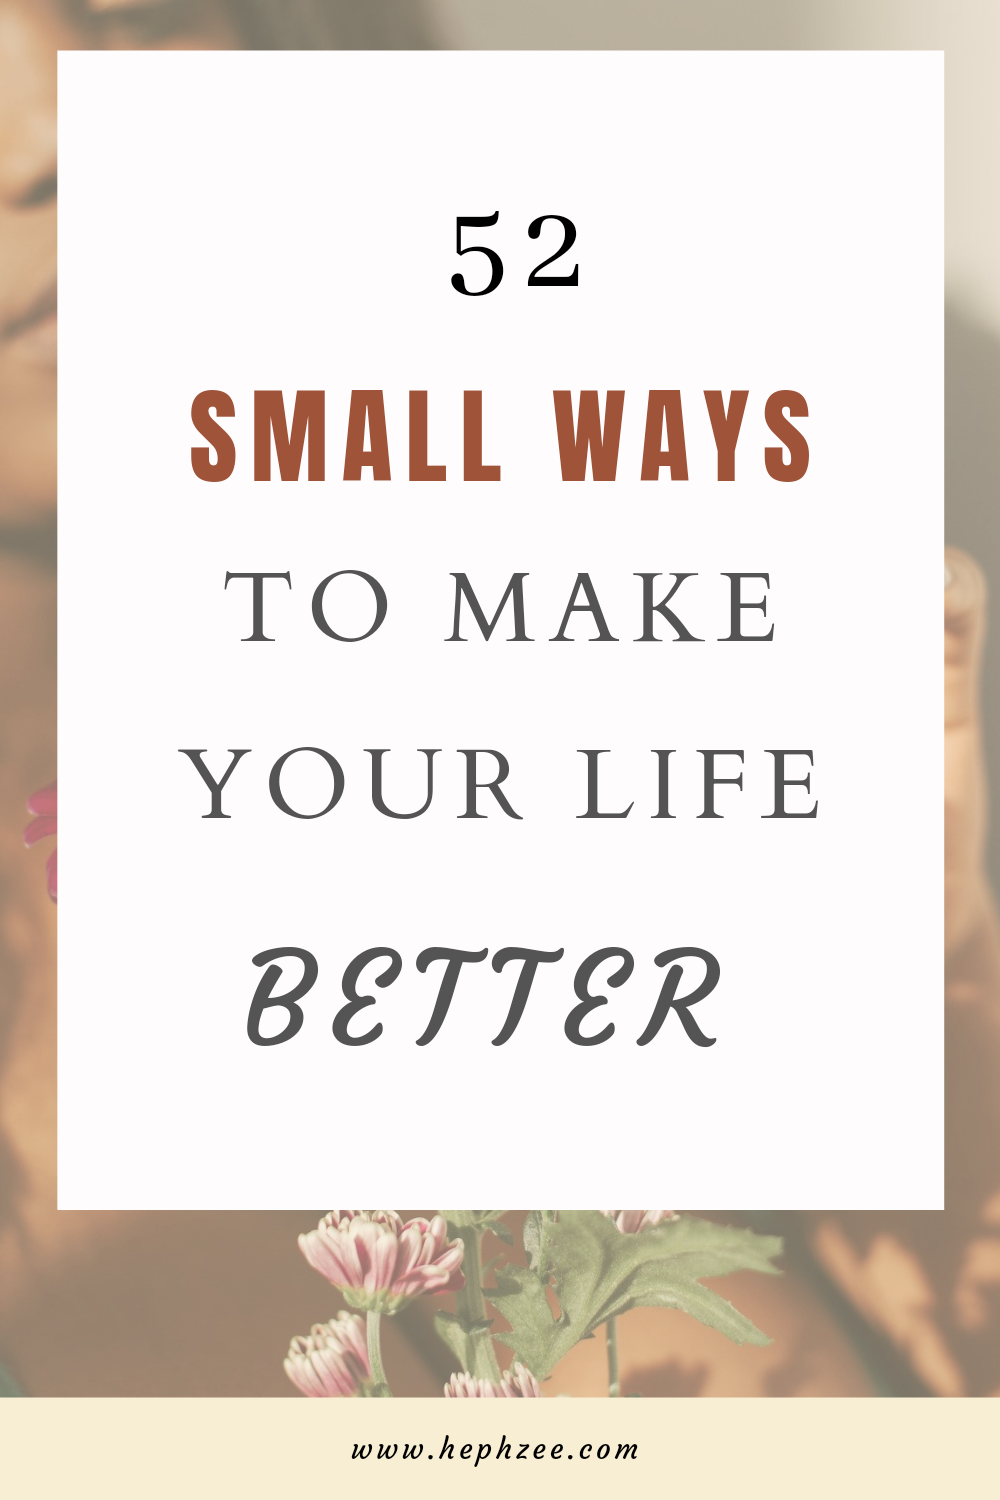 Small ways to make your life better